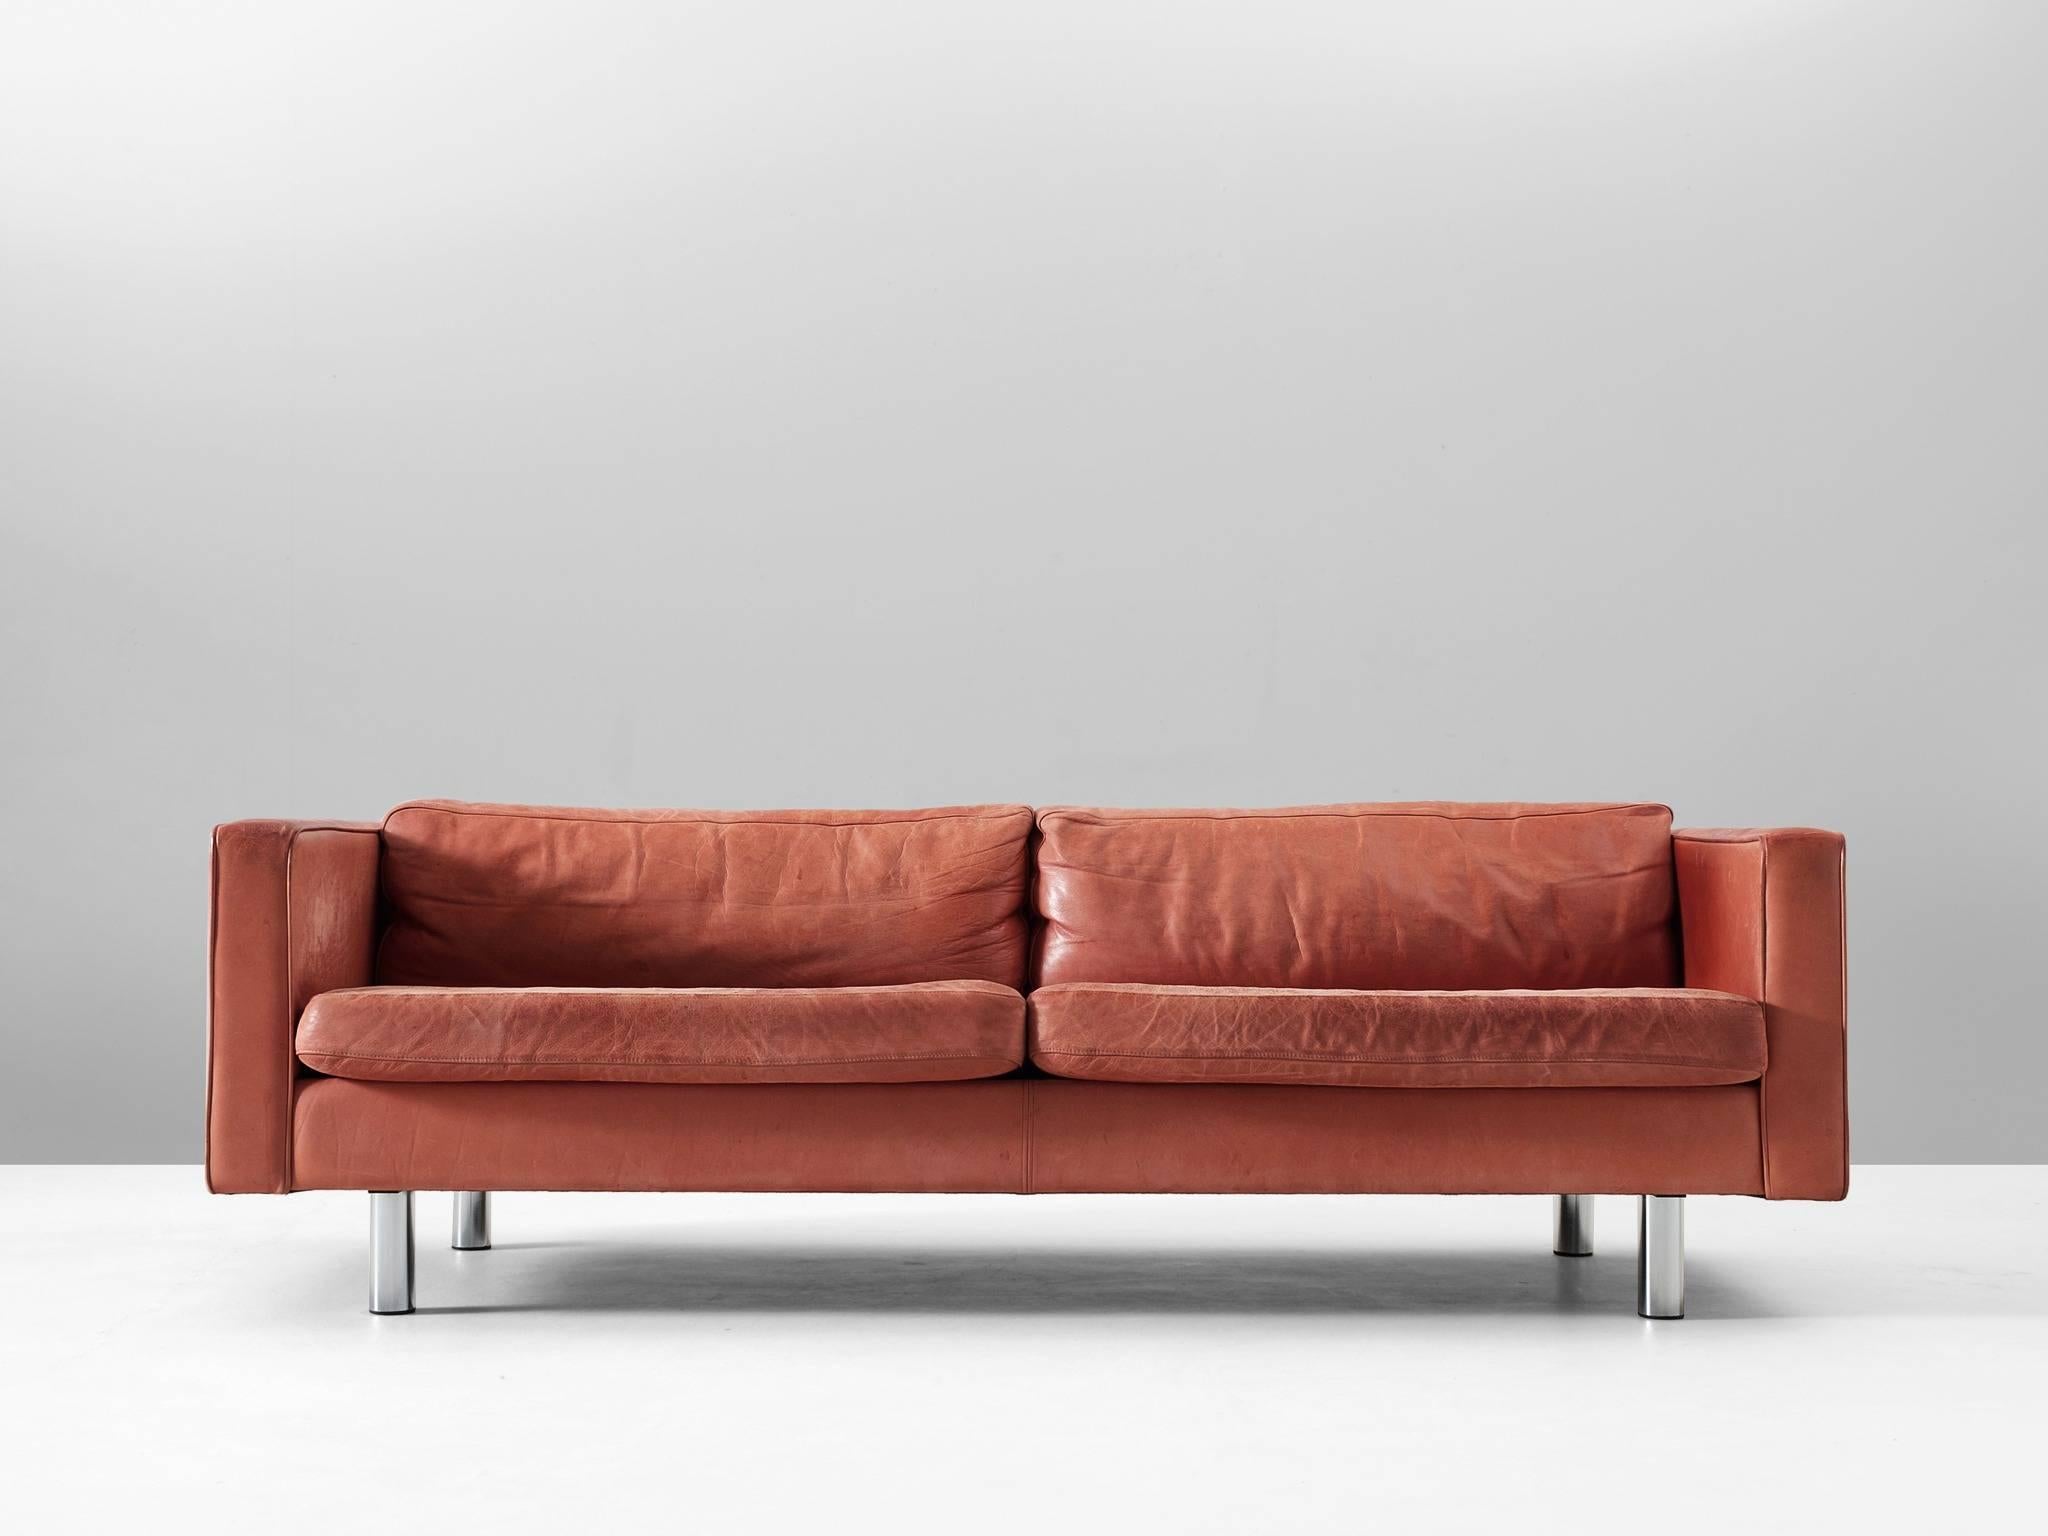 Sofa, in leather and steel by Illums Bolighus, Denmark, 1970s.

Three-seat sofa in red leather. This sturdy sofa has a solid design. Due the loose cushions and quality materials this sofa is highly comfortable. The red leather shows a stunning